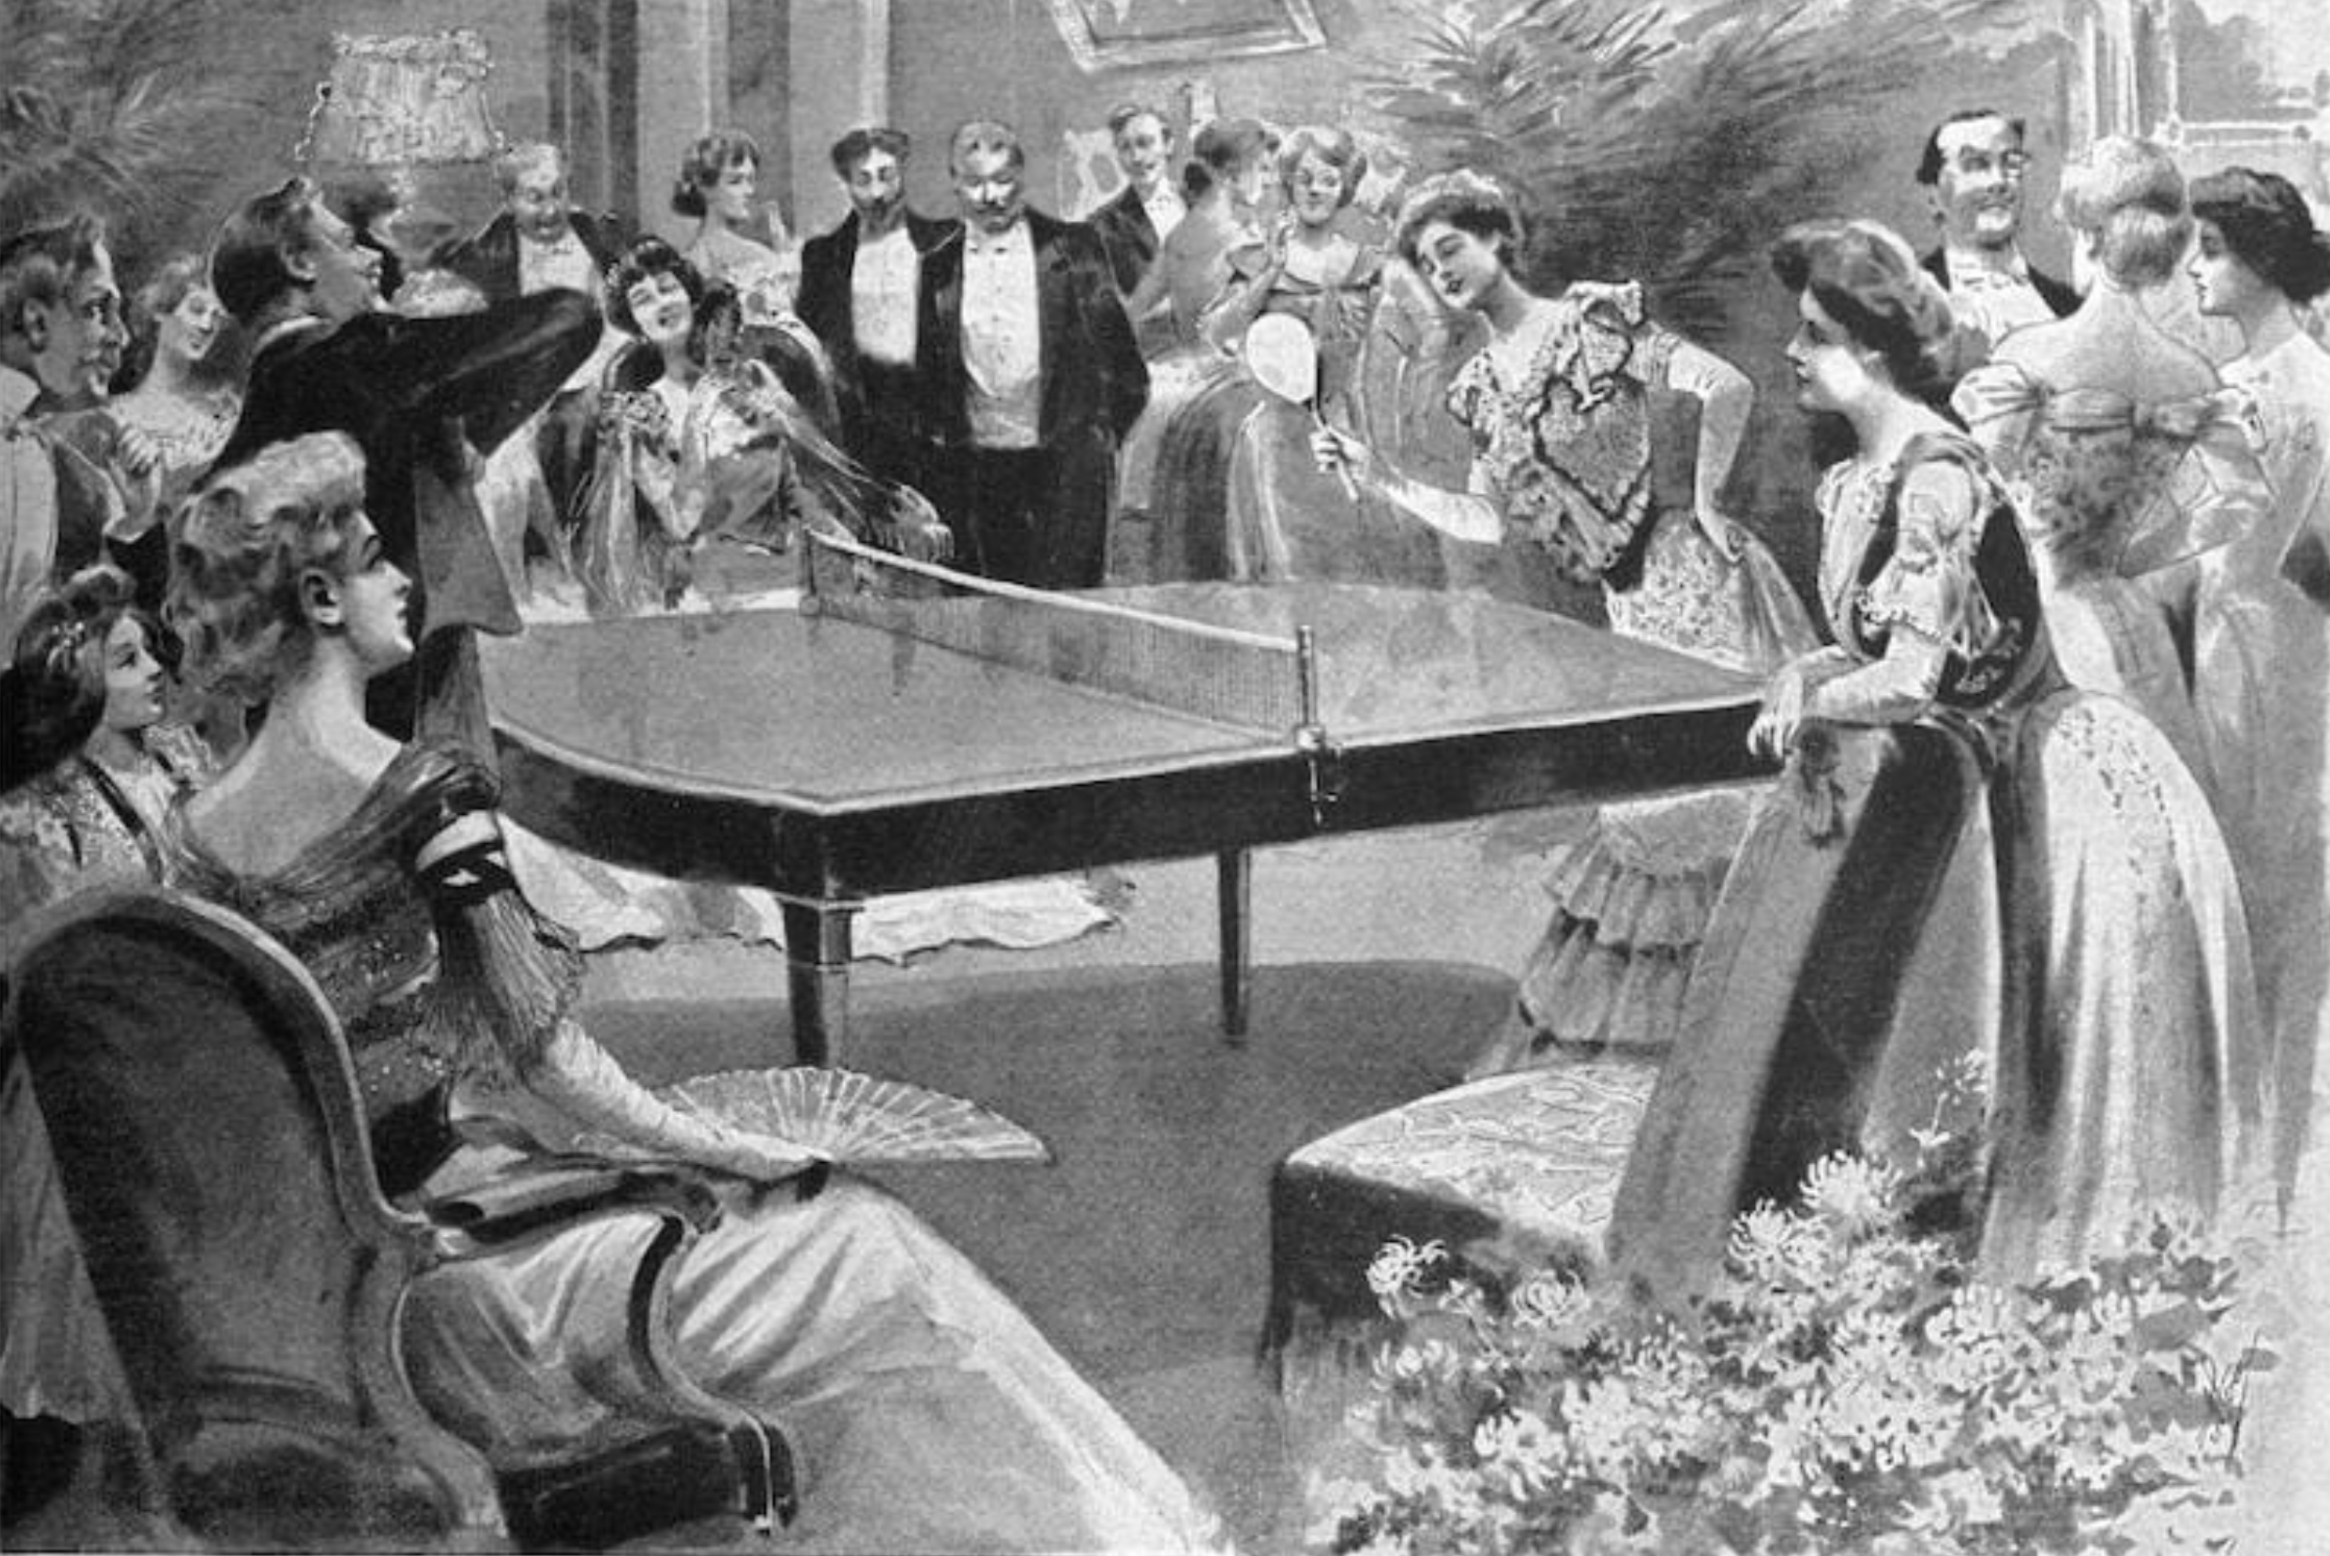 Trending Now: A Brief History of Ping-Pong